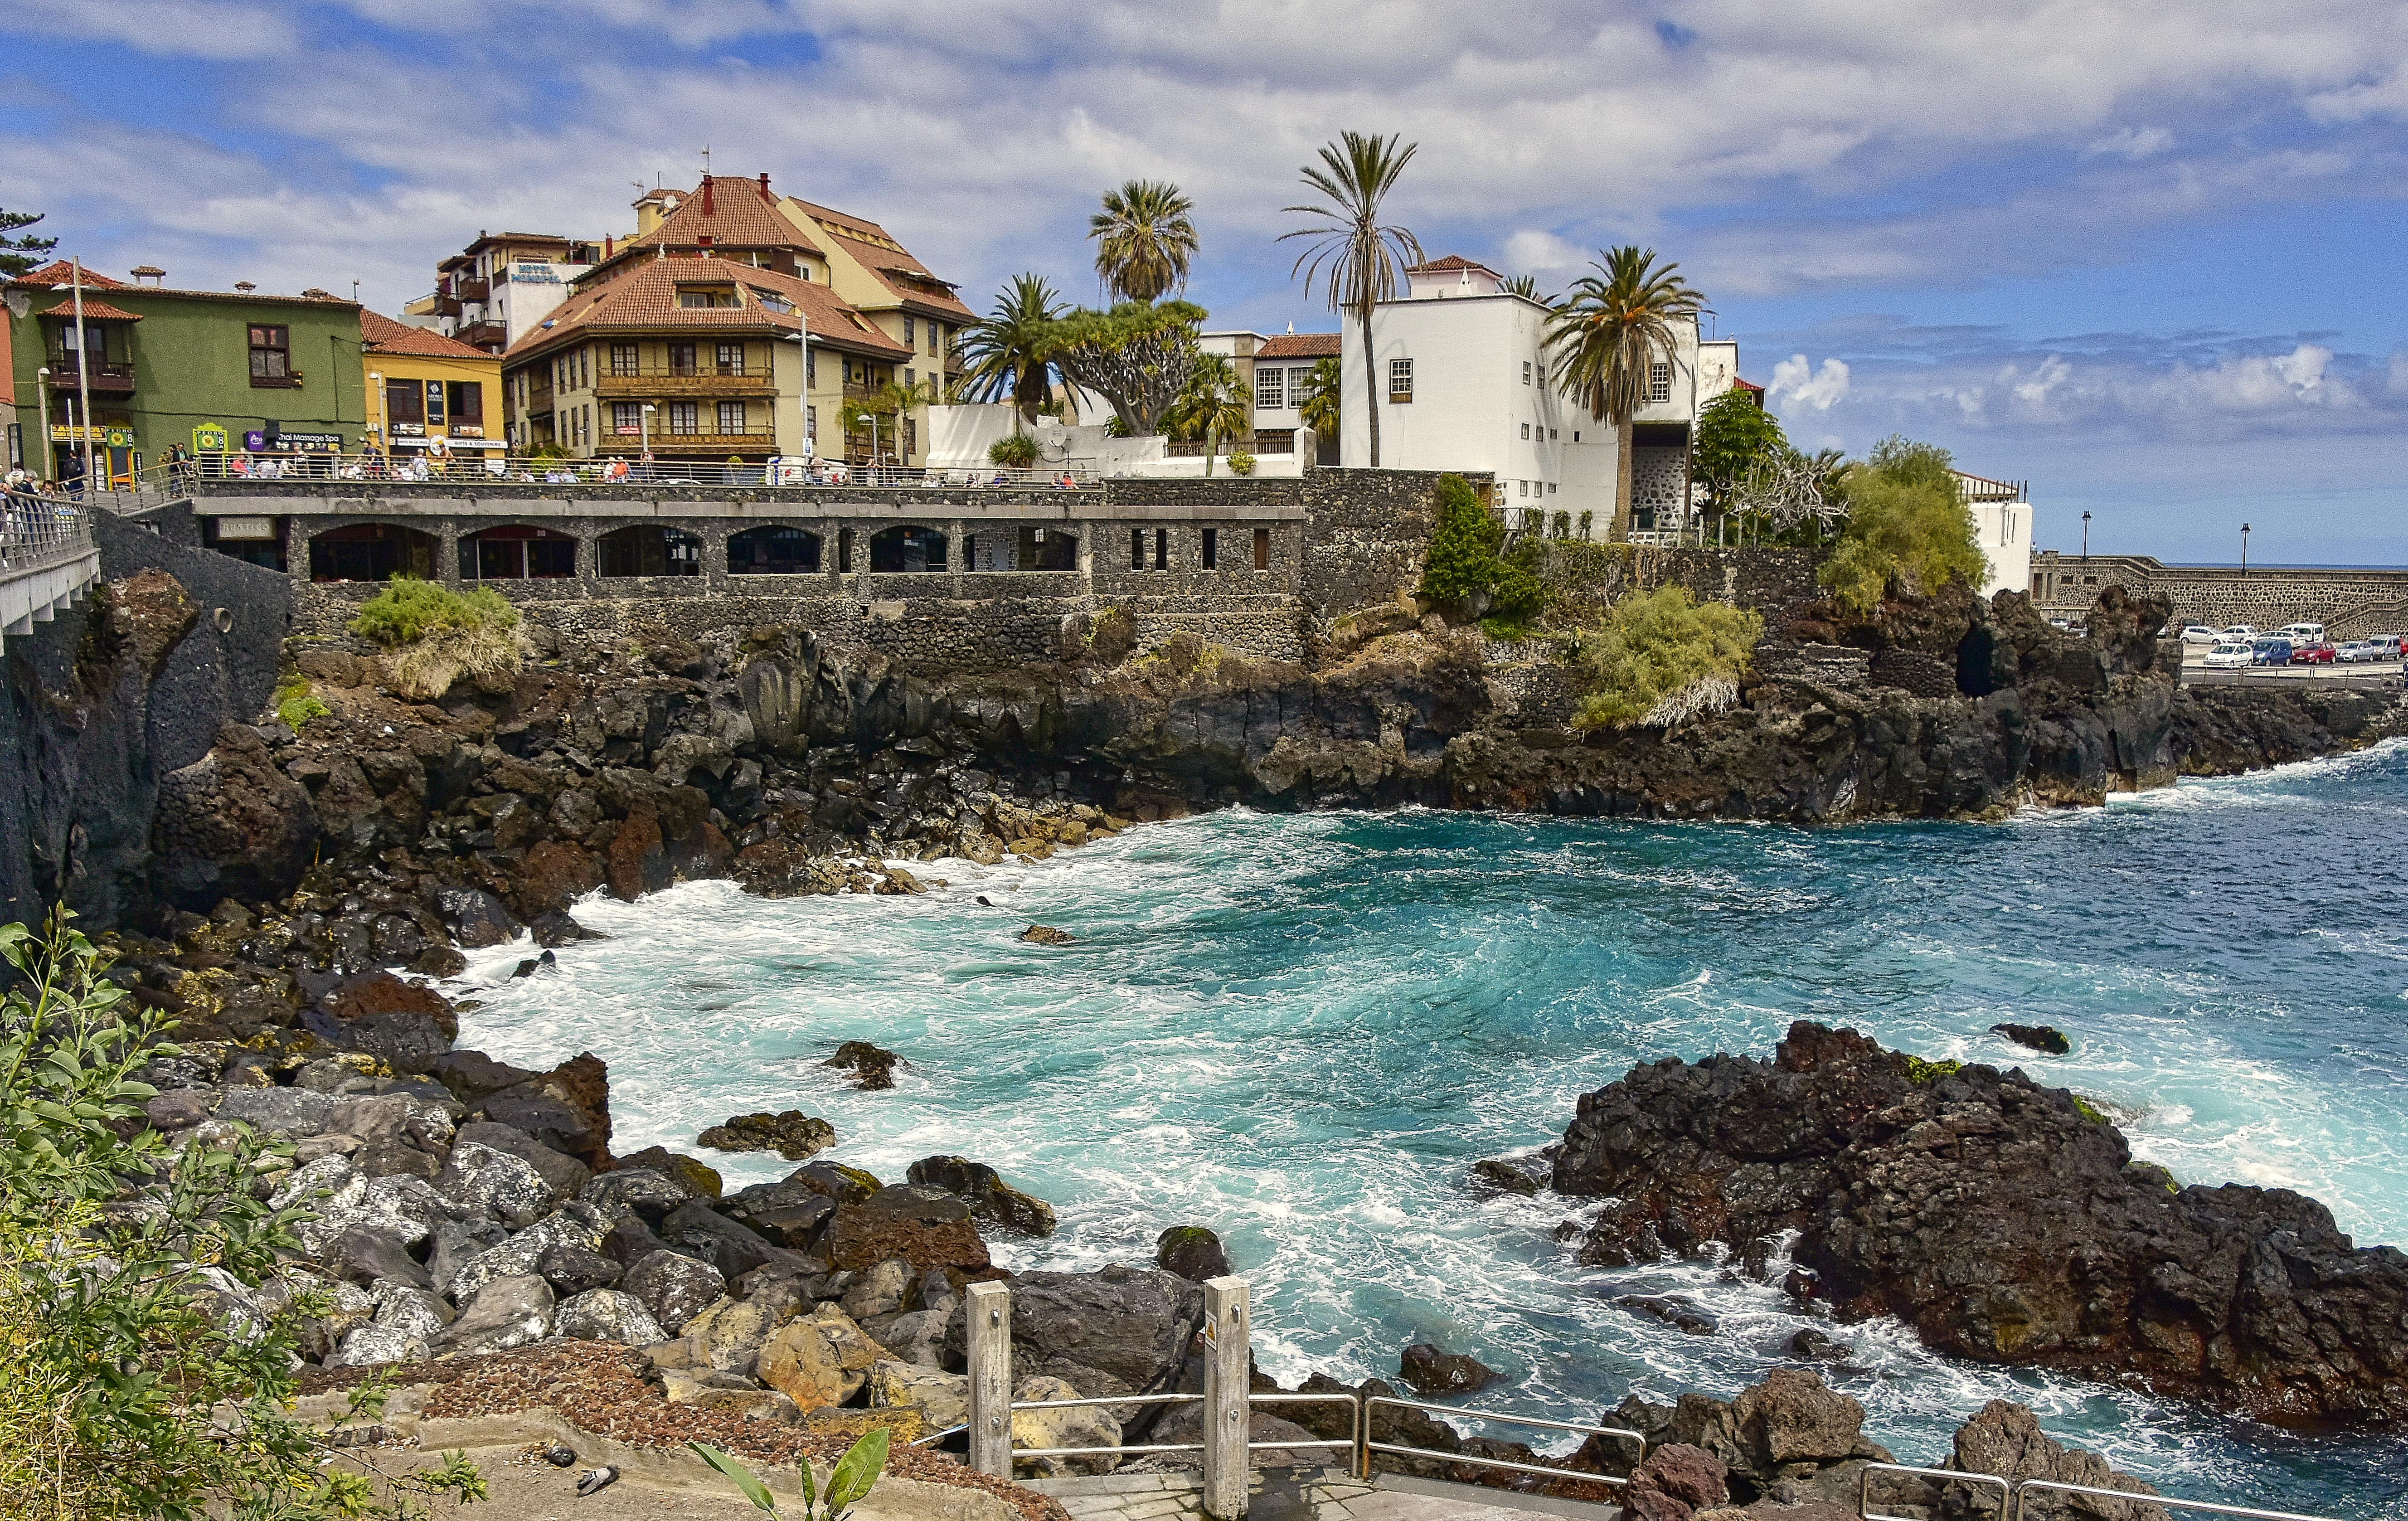 Villas to rent in Tenerife, where summer is all year long